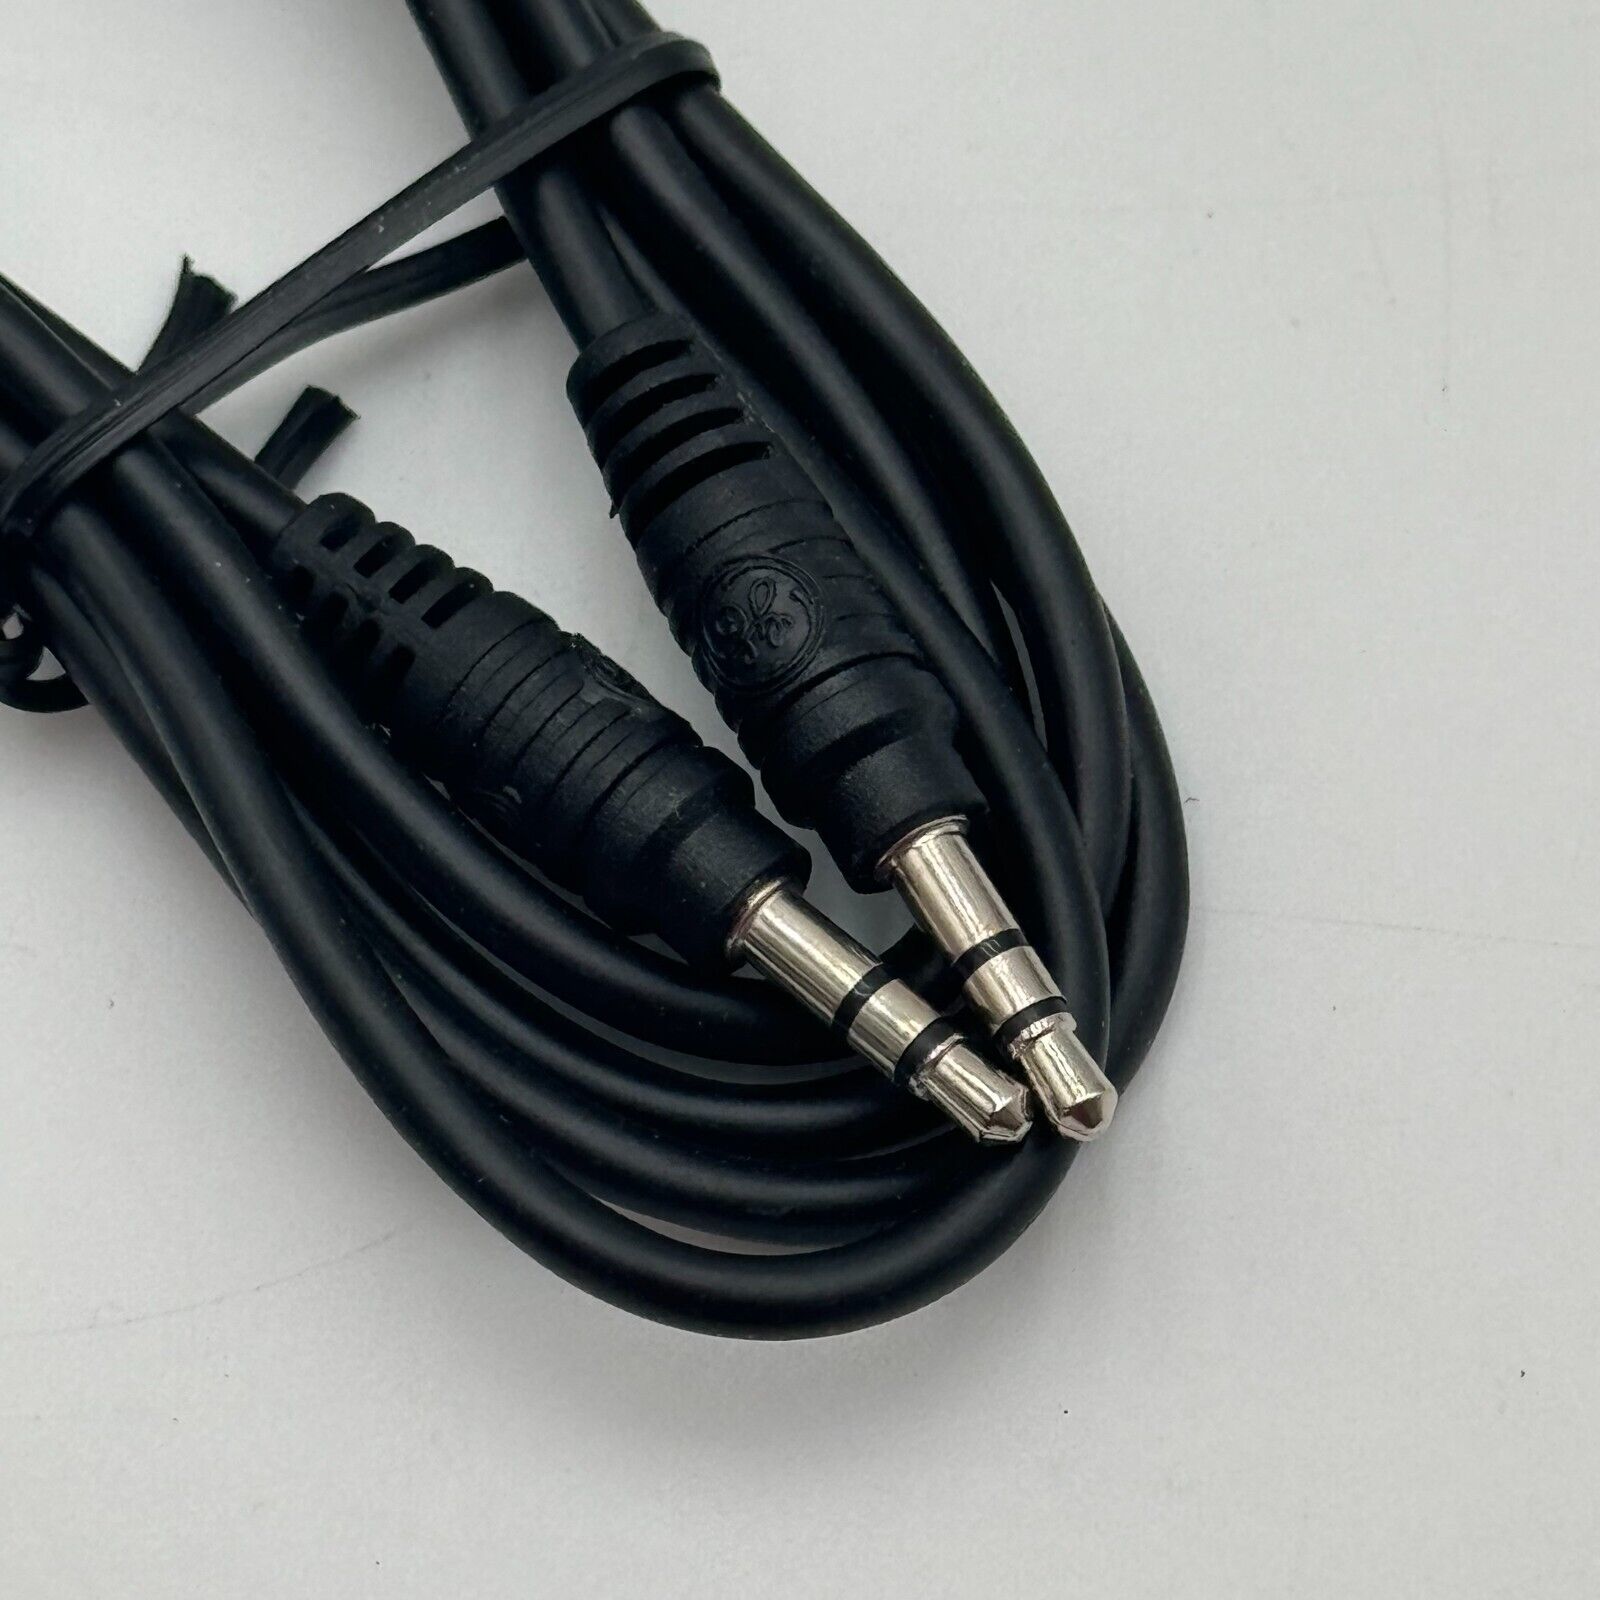 GE Audio Cable 3.5 mm Auxiliary 3ft - New